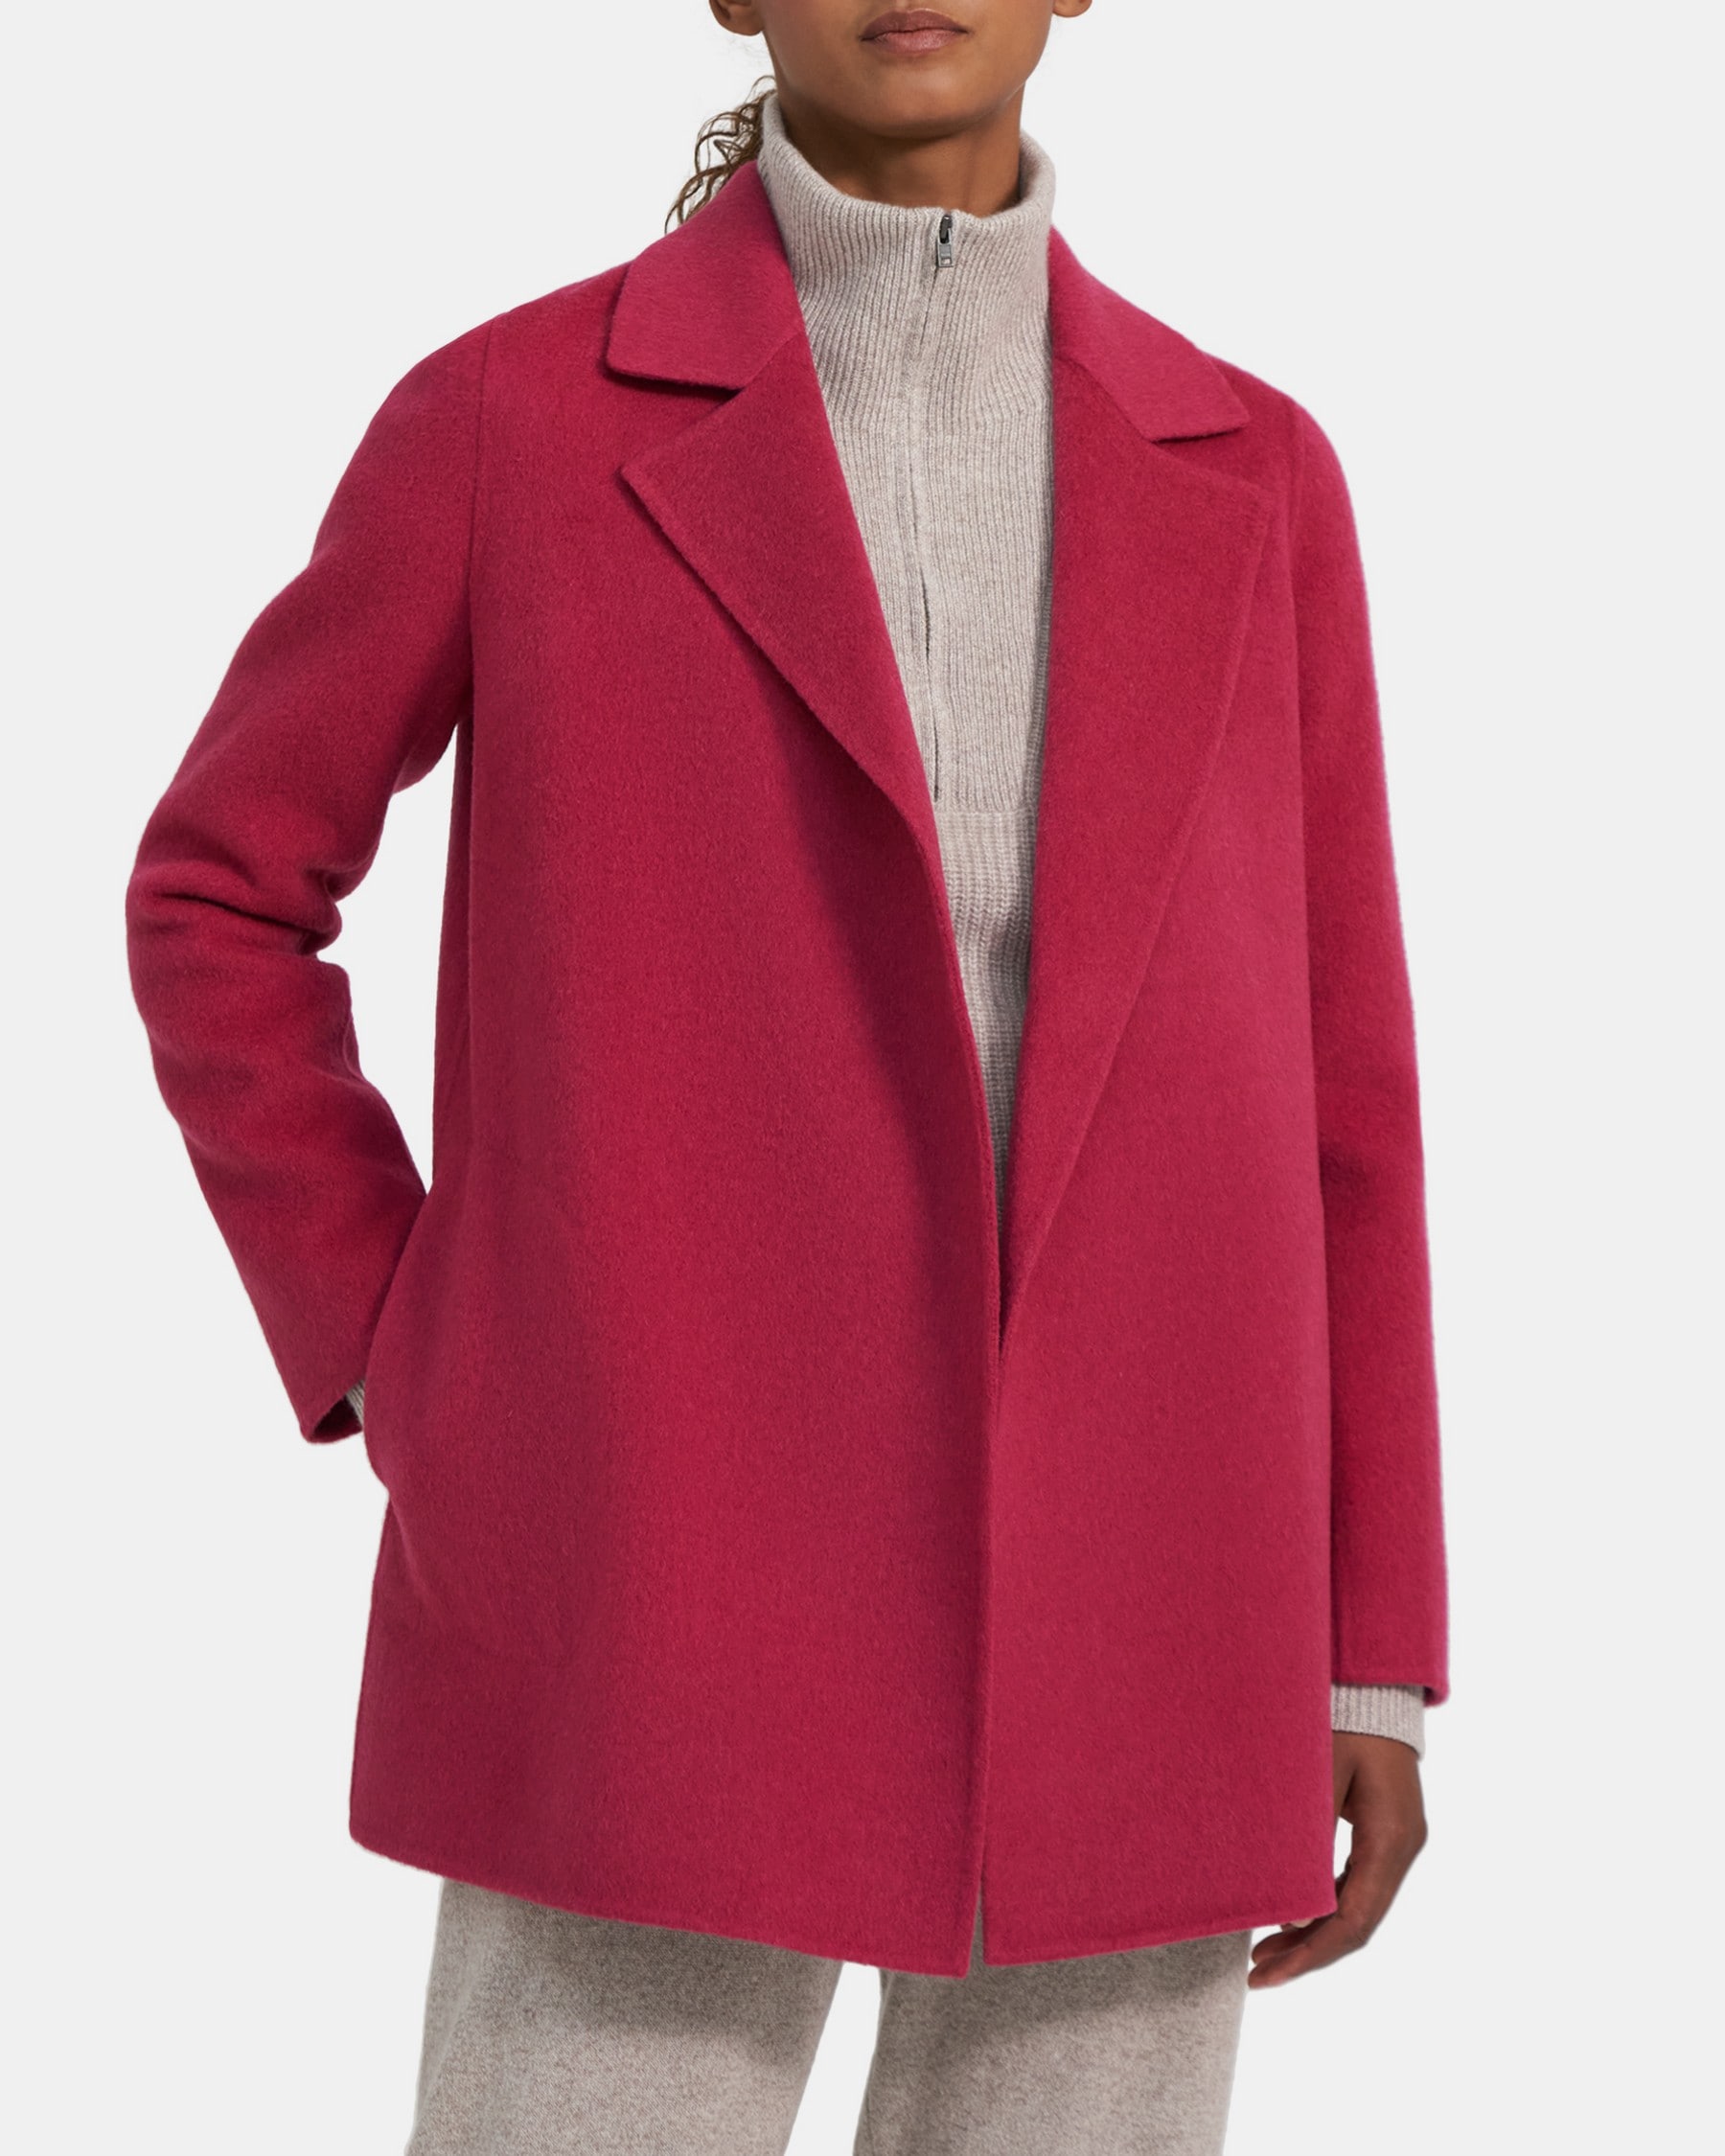 Theory Open Front Coat in Double-Face Wool-Cashmere